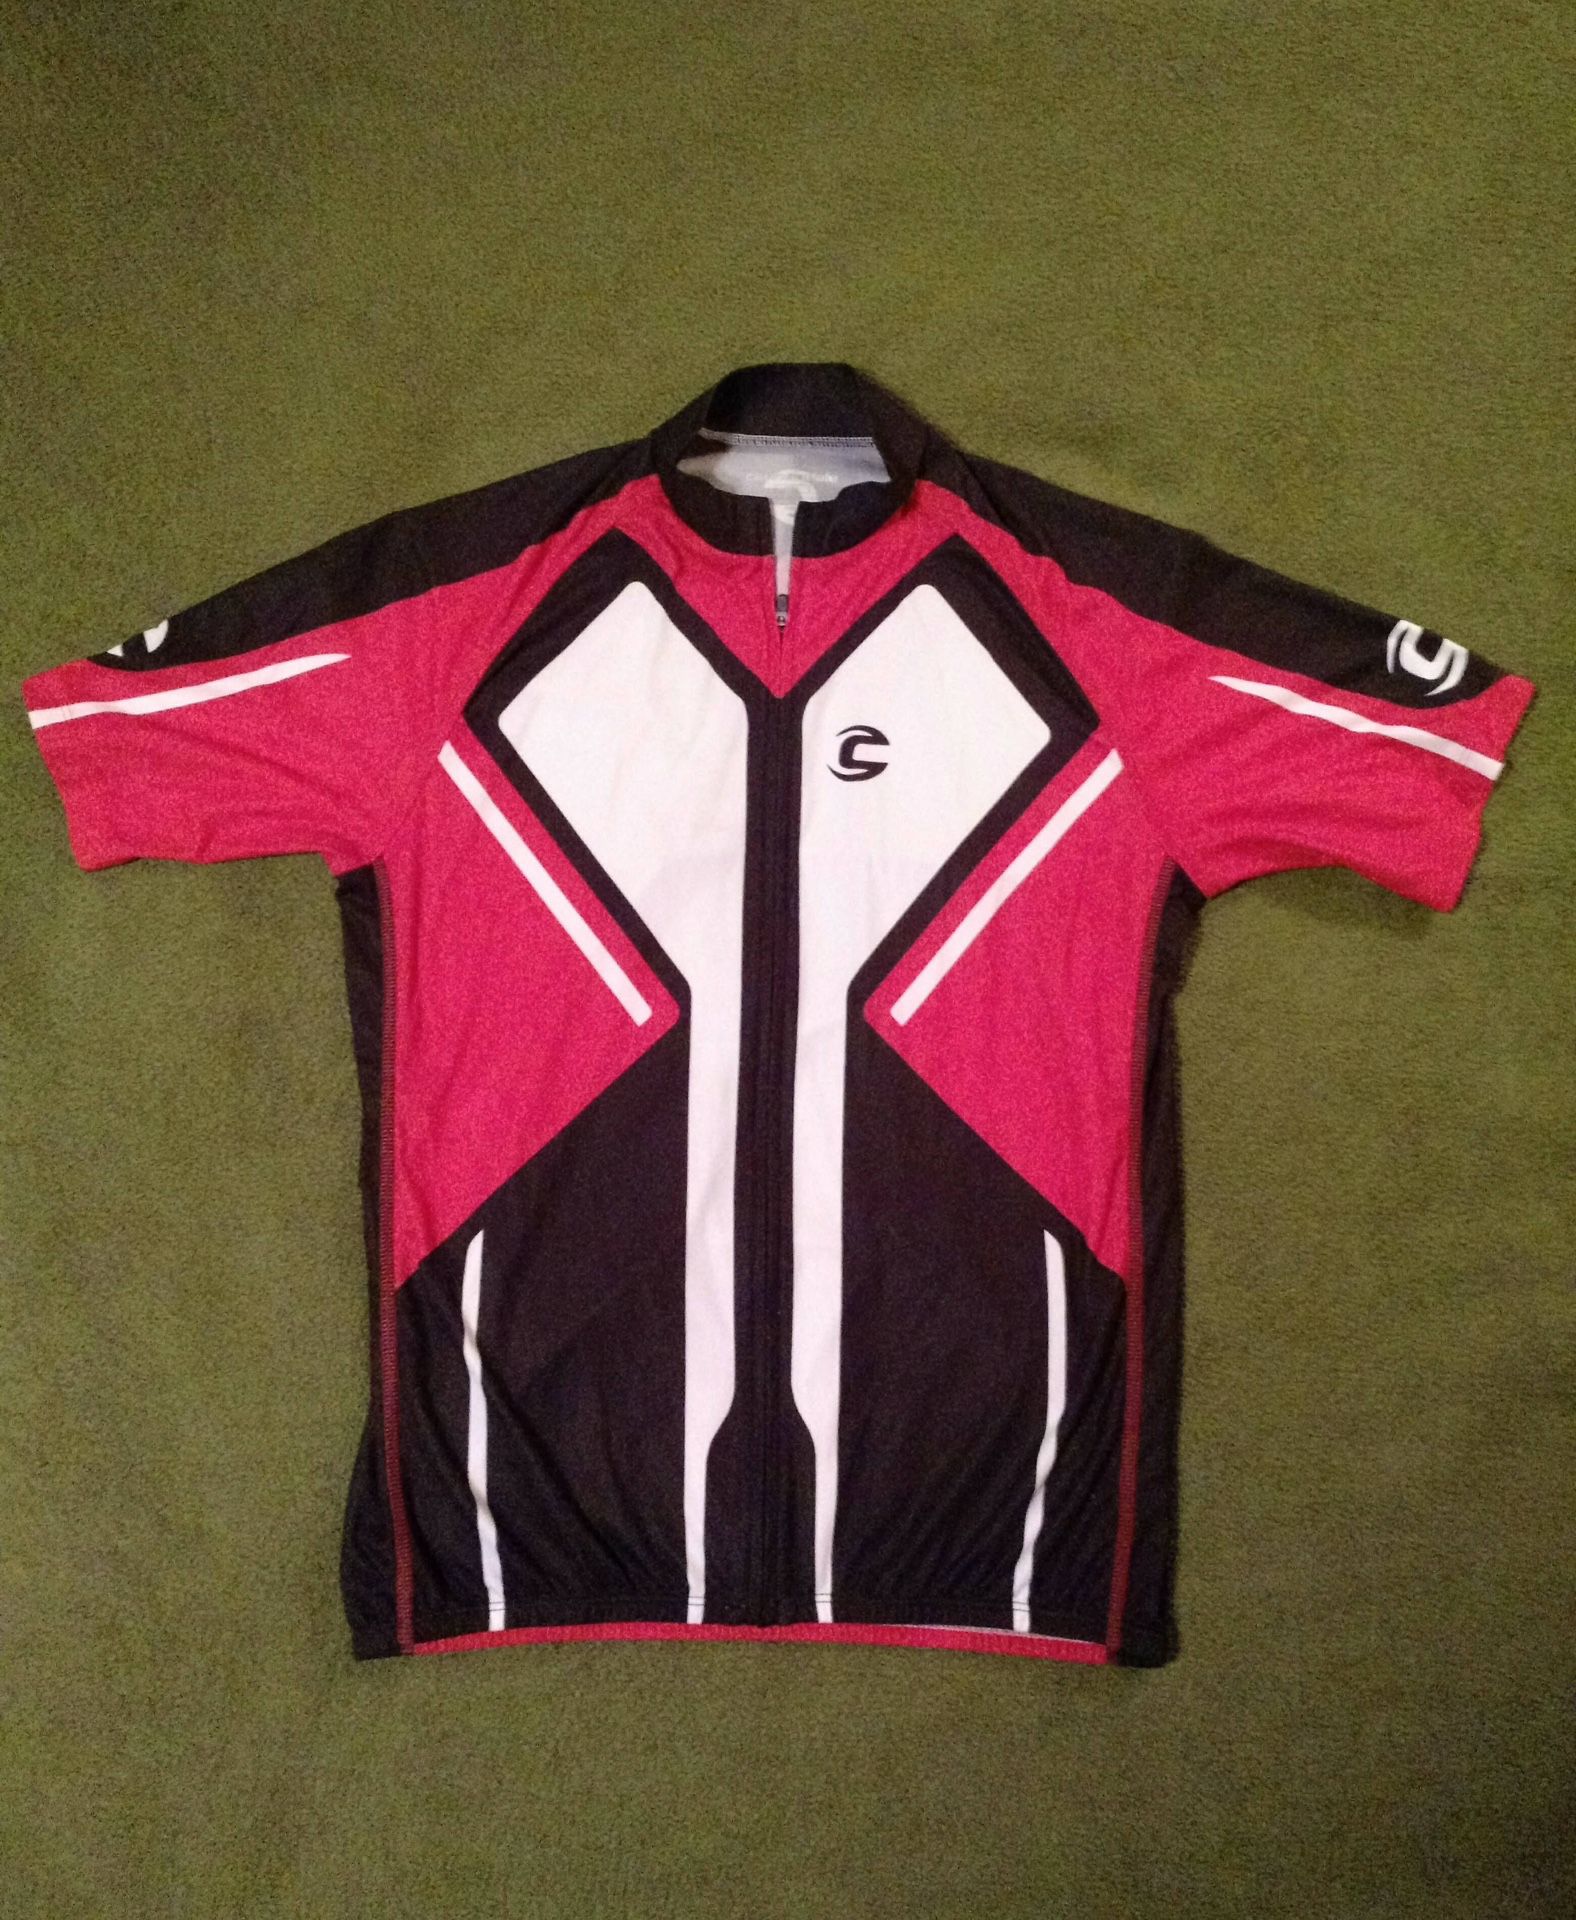 Cannondale Cycling Jersey- Men's Medium